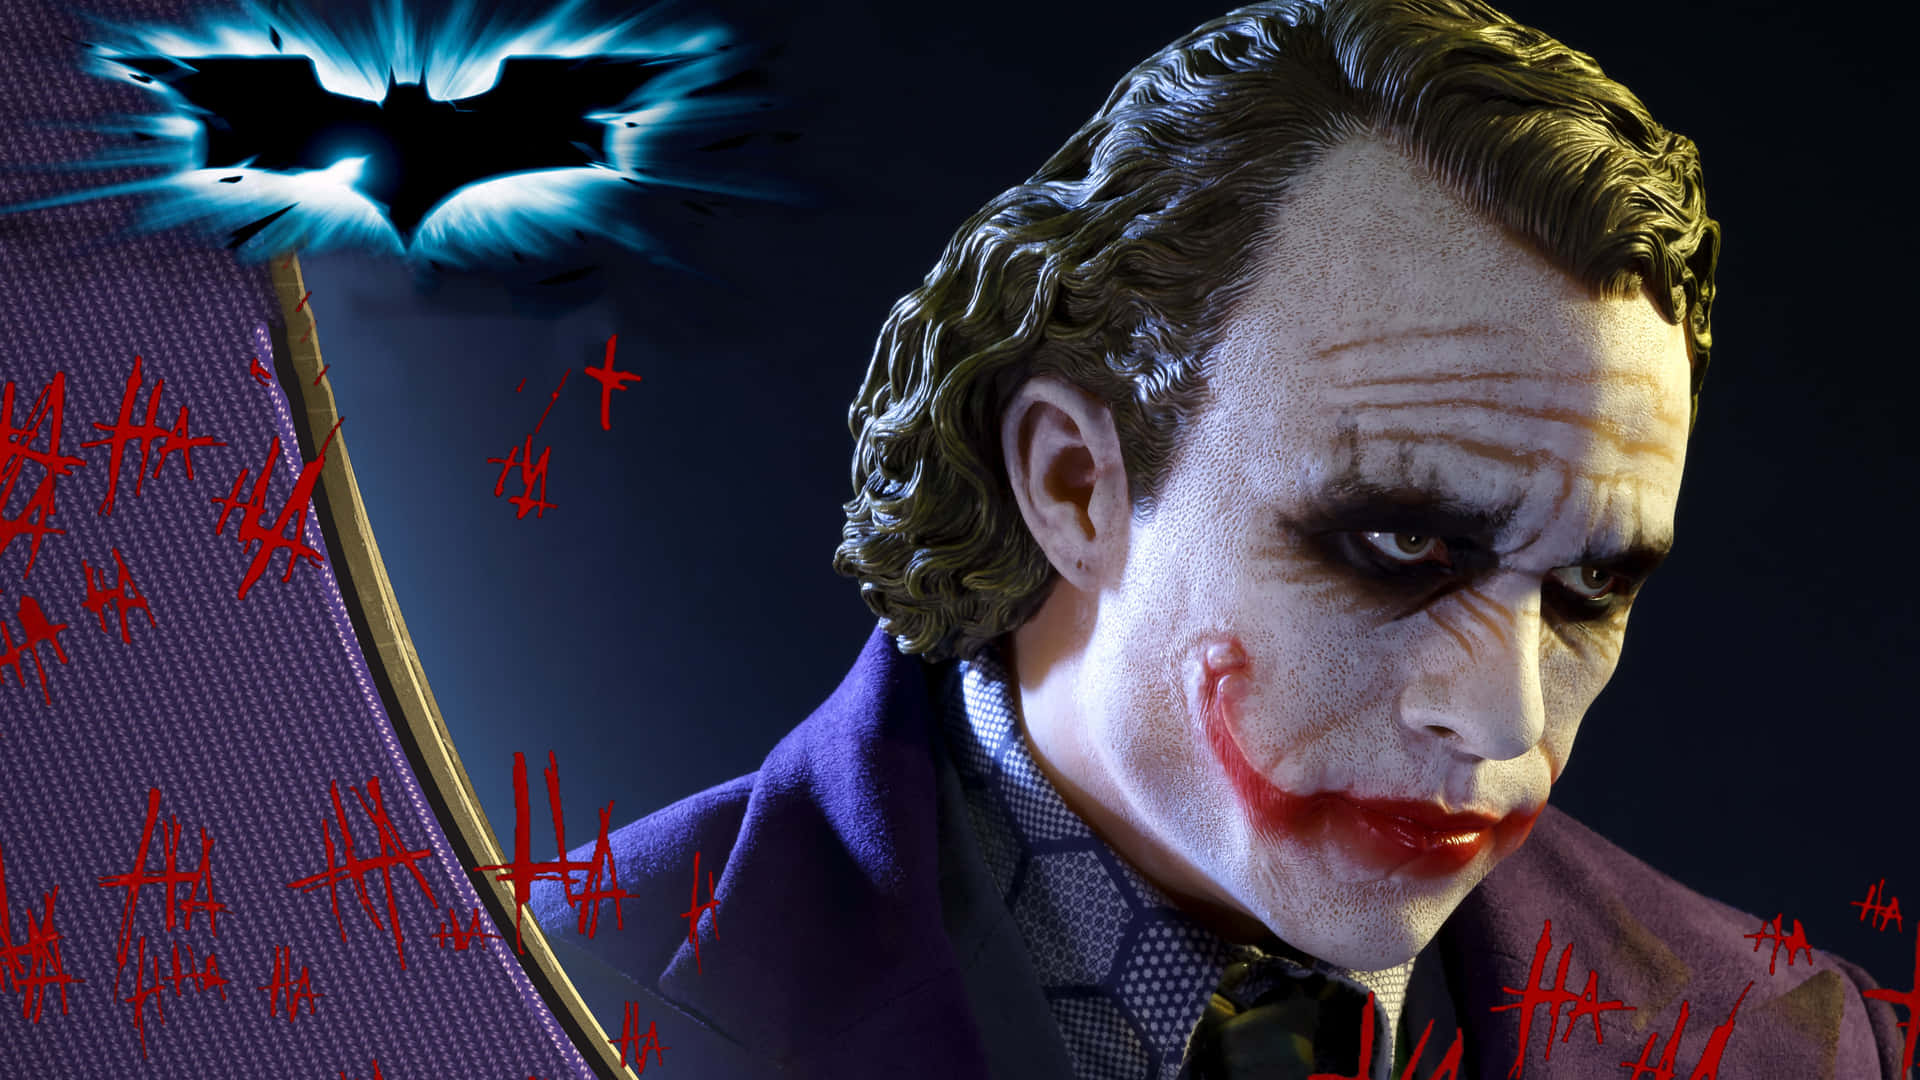 The Joker takes center stage in the ultimate high definition experience - Dark Knight in 4K Ultra HD. Wallpaper